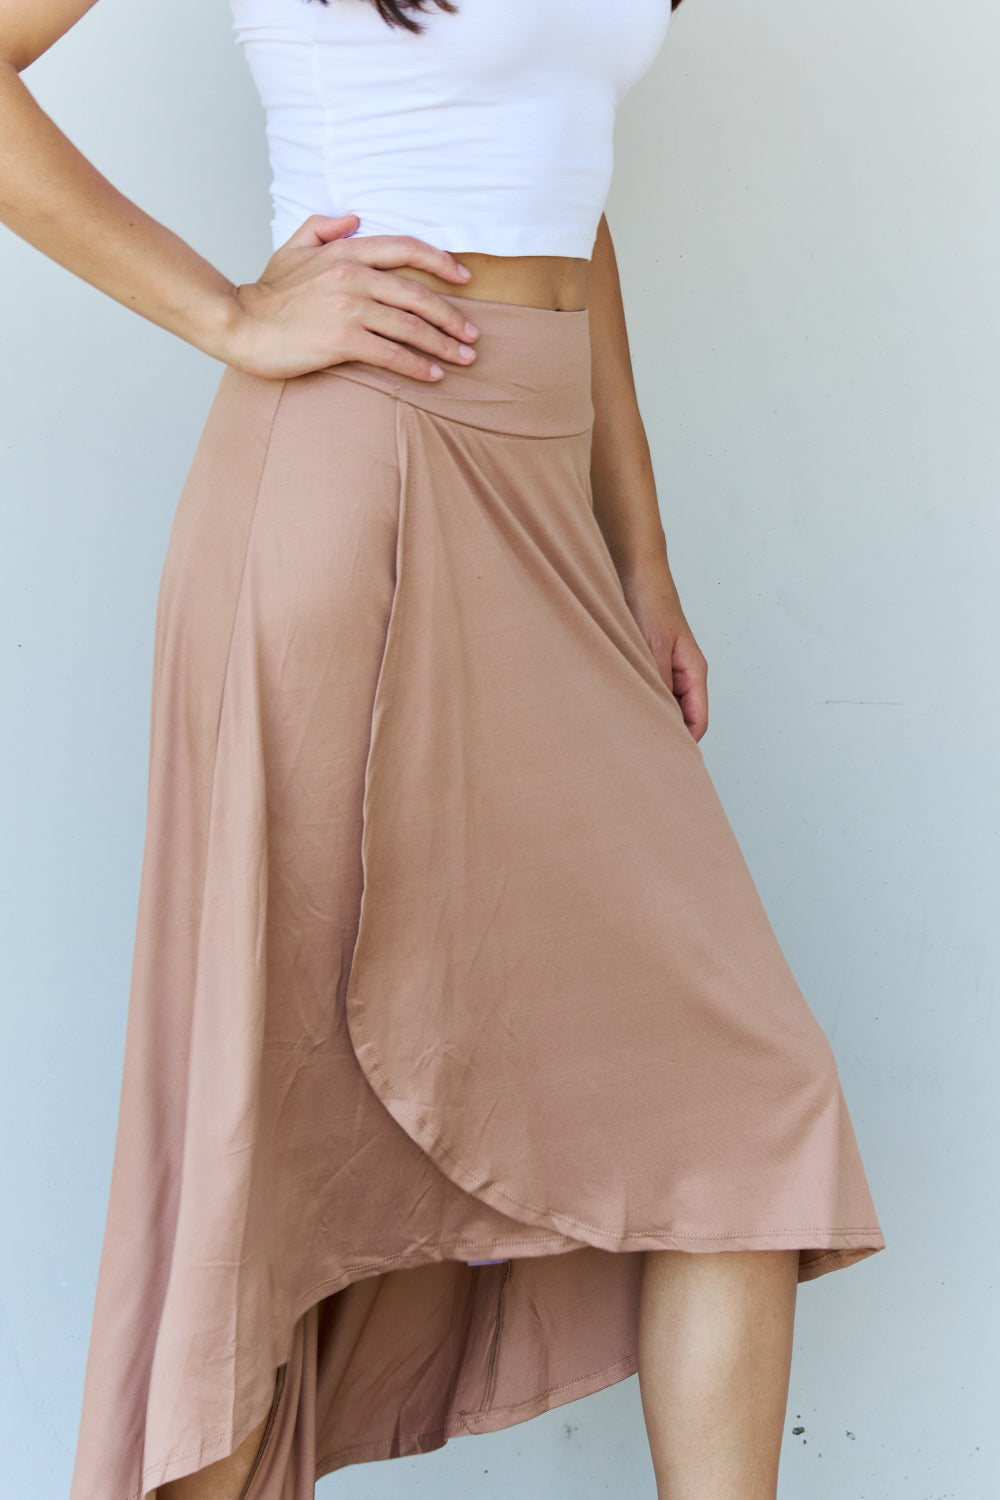 Gray Ninexis First Choice High Waisted Flare Maxi Skirt in Camel Sentient Beauty Fashions Apparel & Accessories